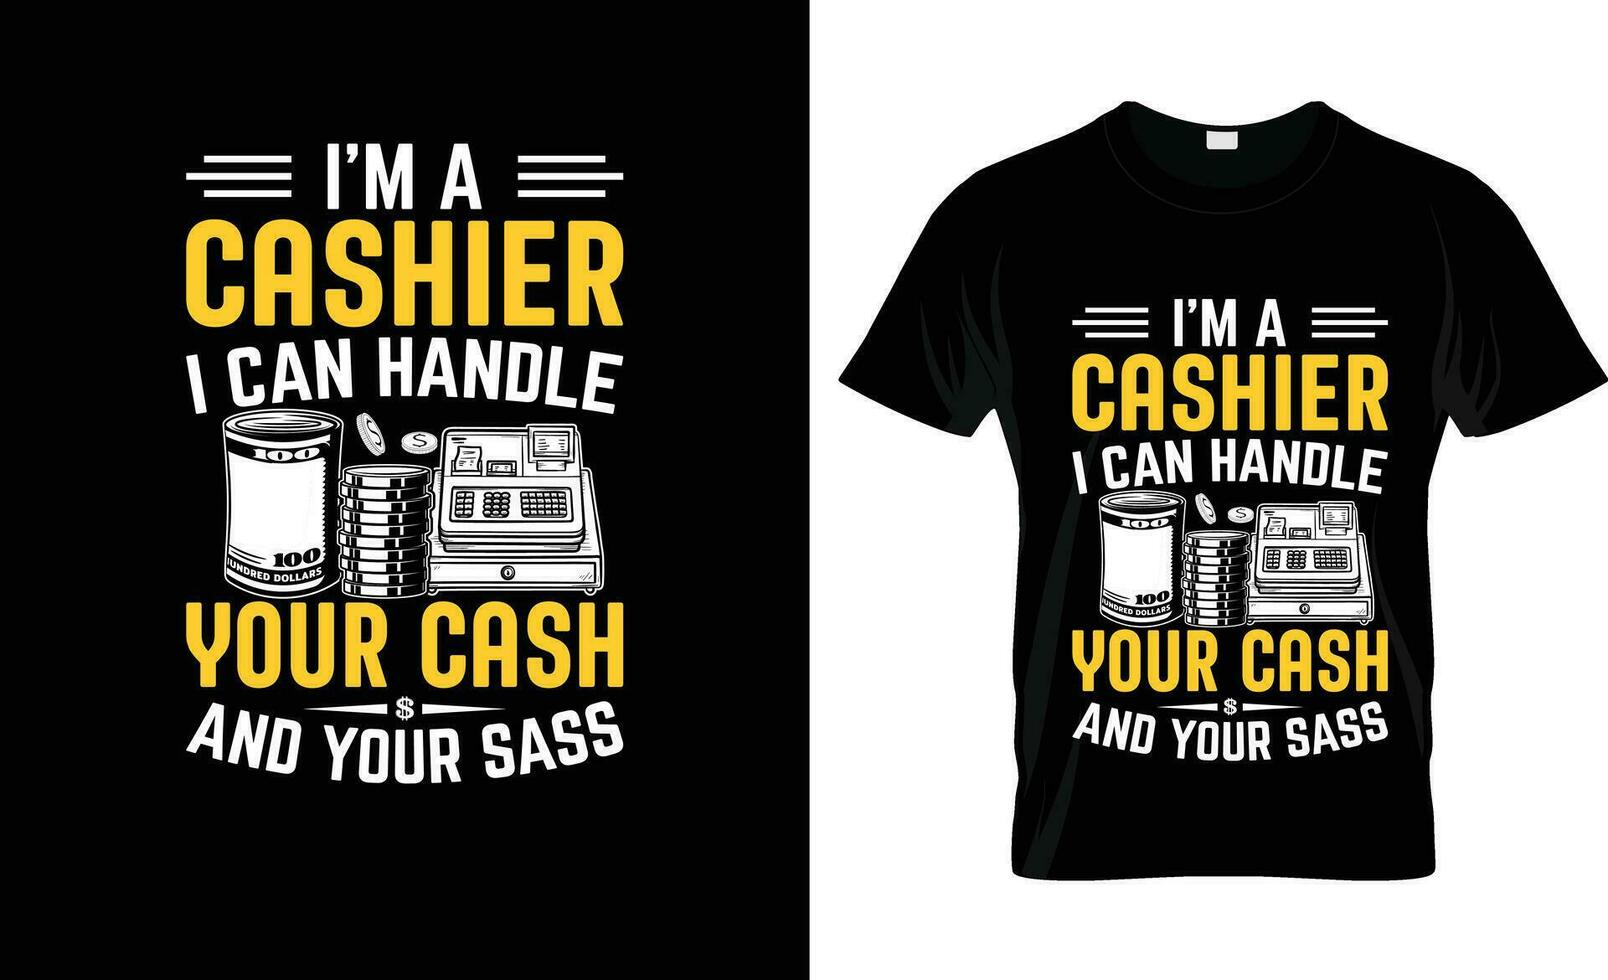 I'm a cashier i can handle your cash colorful Graphic T-Shirt,  t-shirt print mockup vector